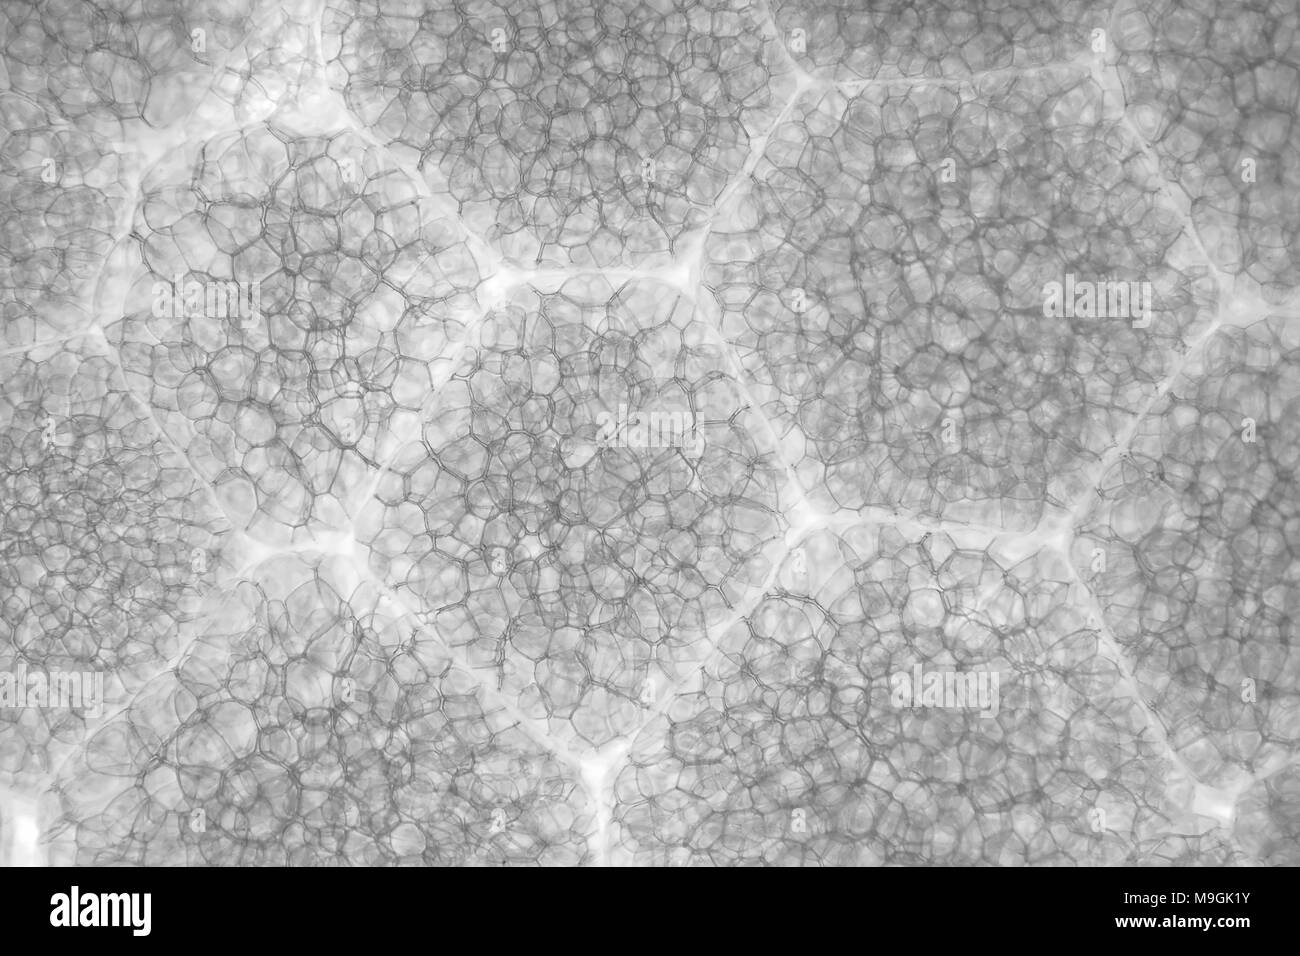 Light micrograph of a polystyrene foam expanded polystyrene (styrofoam, slow to biodegrade) disposable cup, pictured area is approximately 3mm wide Stock Photo